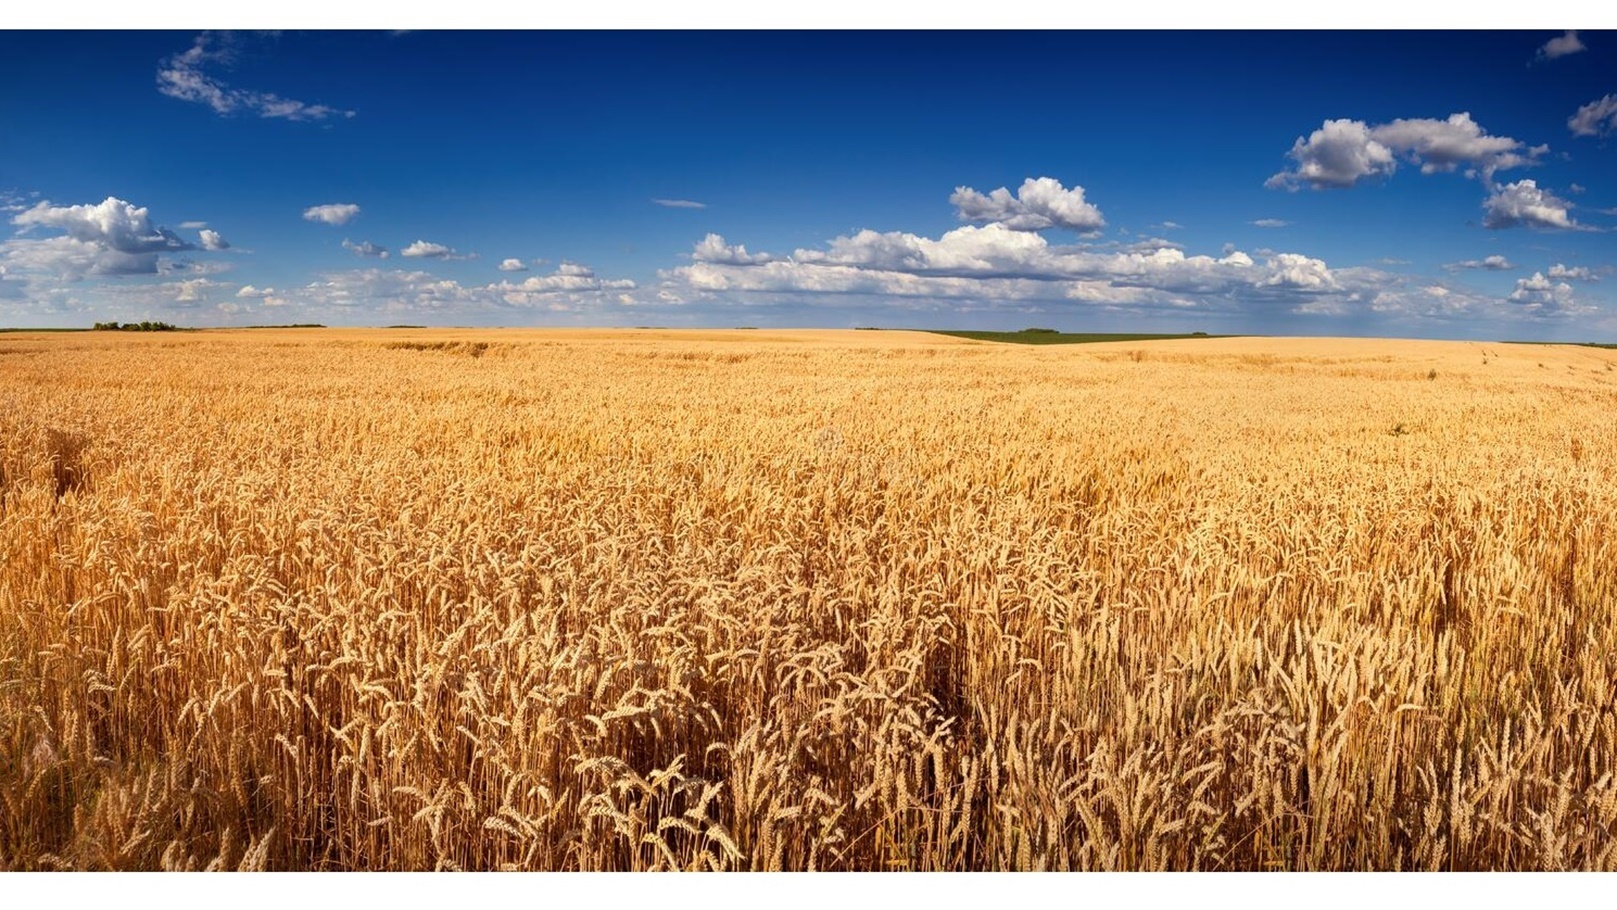 golden-wheat-field-panorama-harvest-agricultural-fields-executed-titel-hill-titel-hill-loess-hillock-situated-59644932